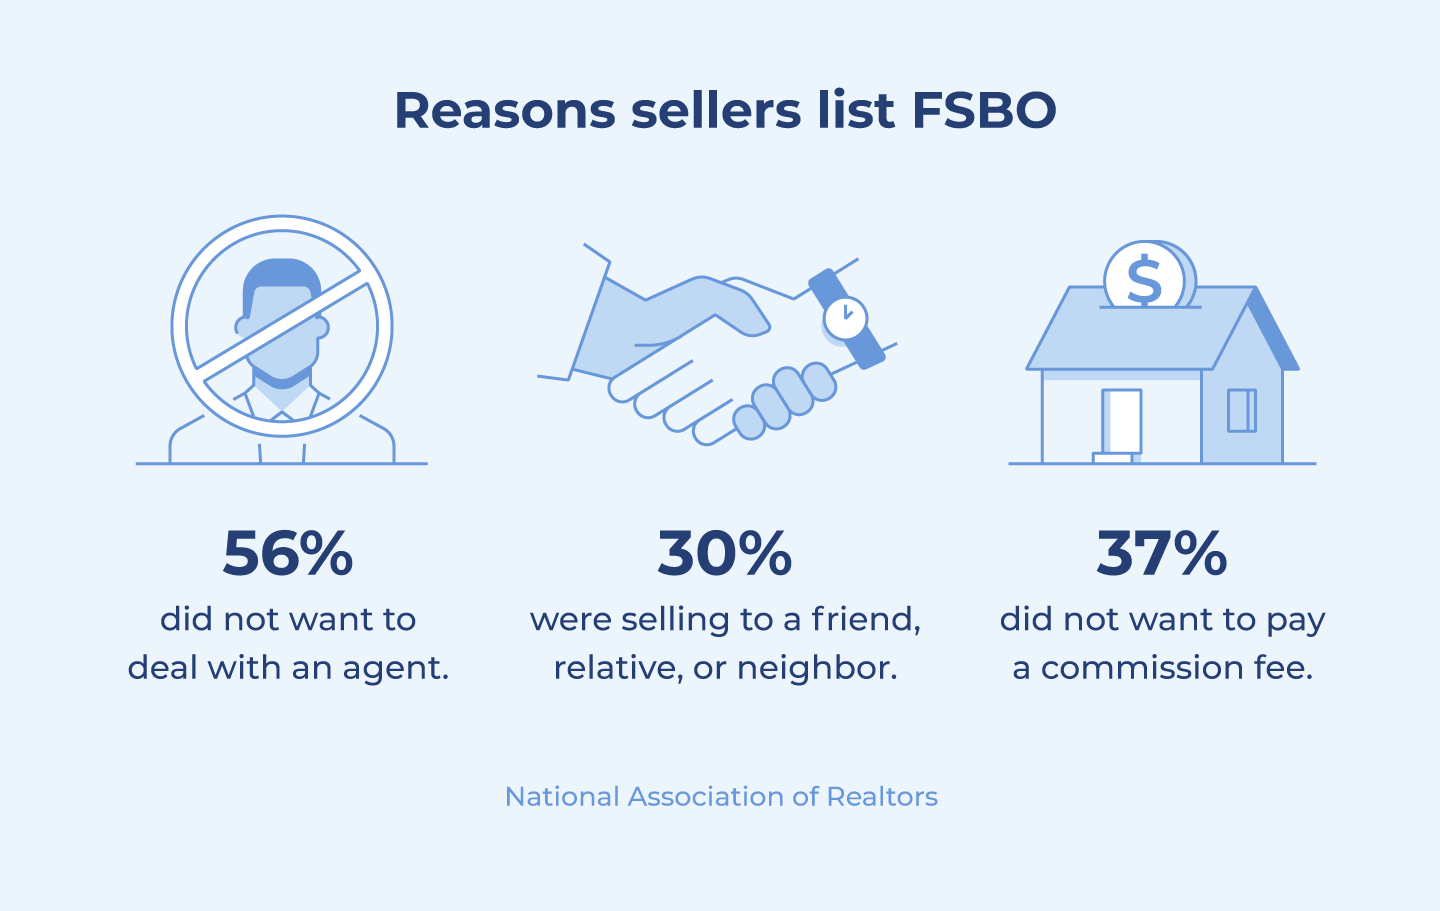 Top reasons for not using an agent include not wanting to deal with an agent (56% of respondents); selling to a friend, neighbor, or relative (30% of respondents); and not wanting to pay a commission fee (37% of respondents).